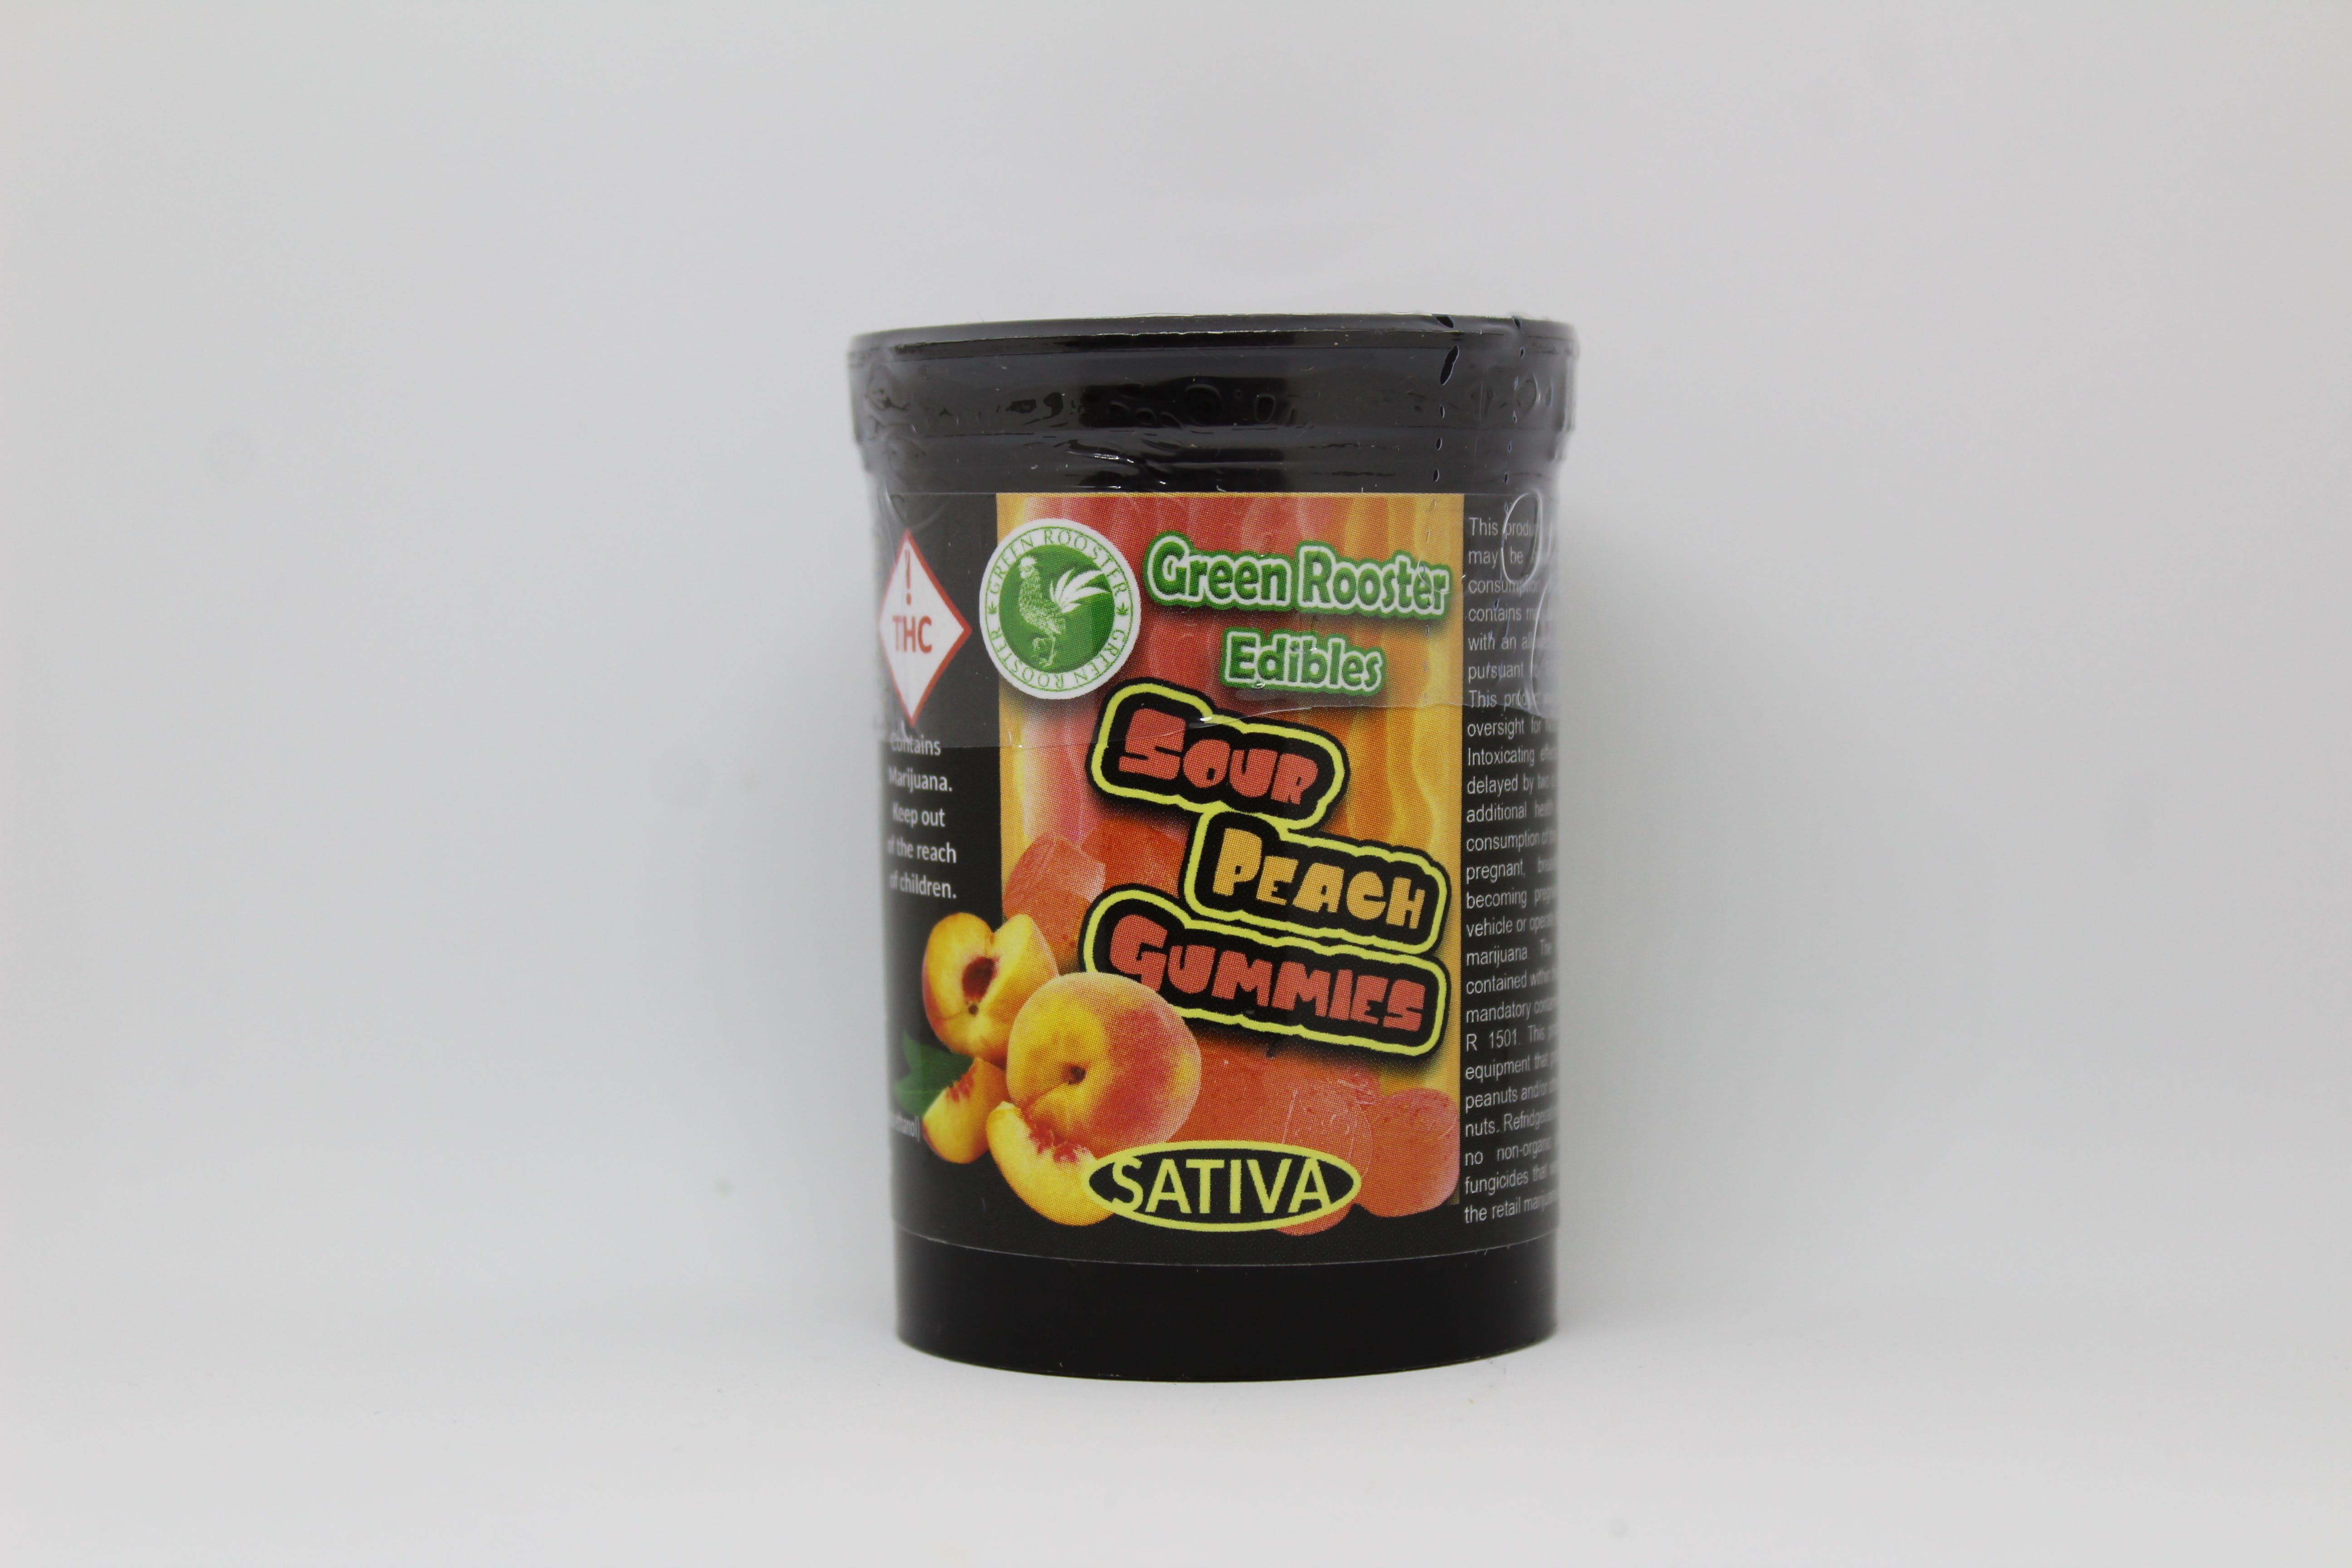 edible-green-rooster-sour-peach-edible-100-mg-gummies-tax-included